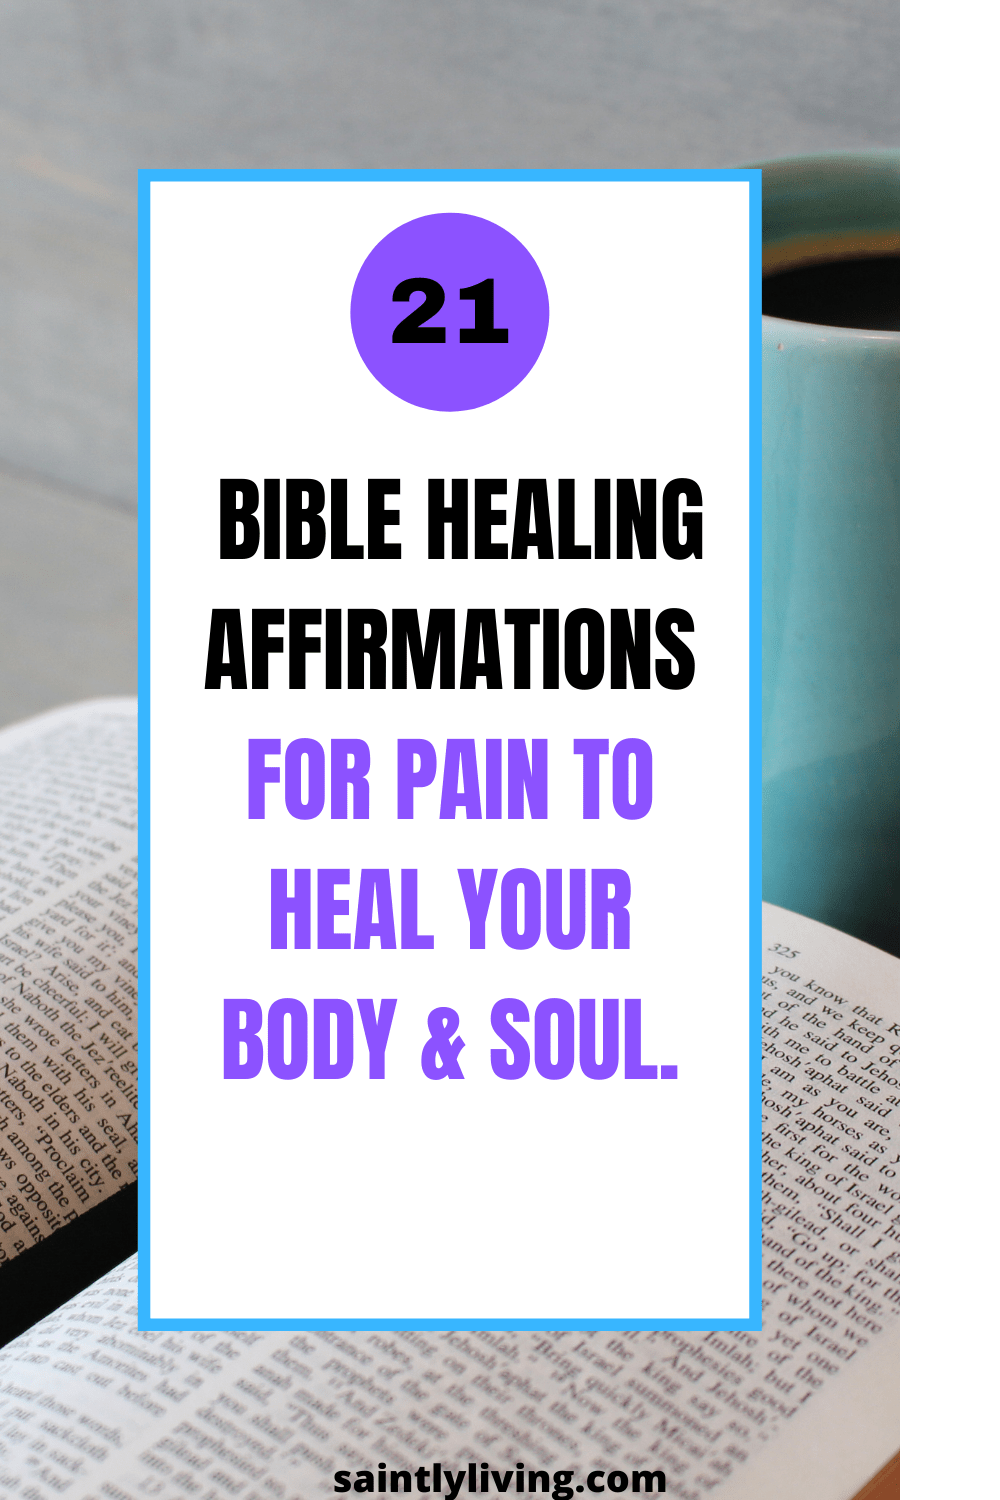 Christian-healing-affirmations-for-pain